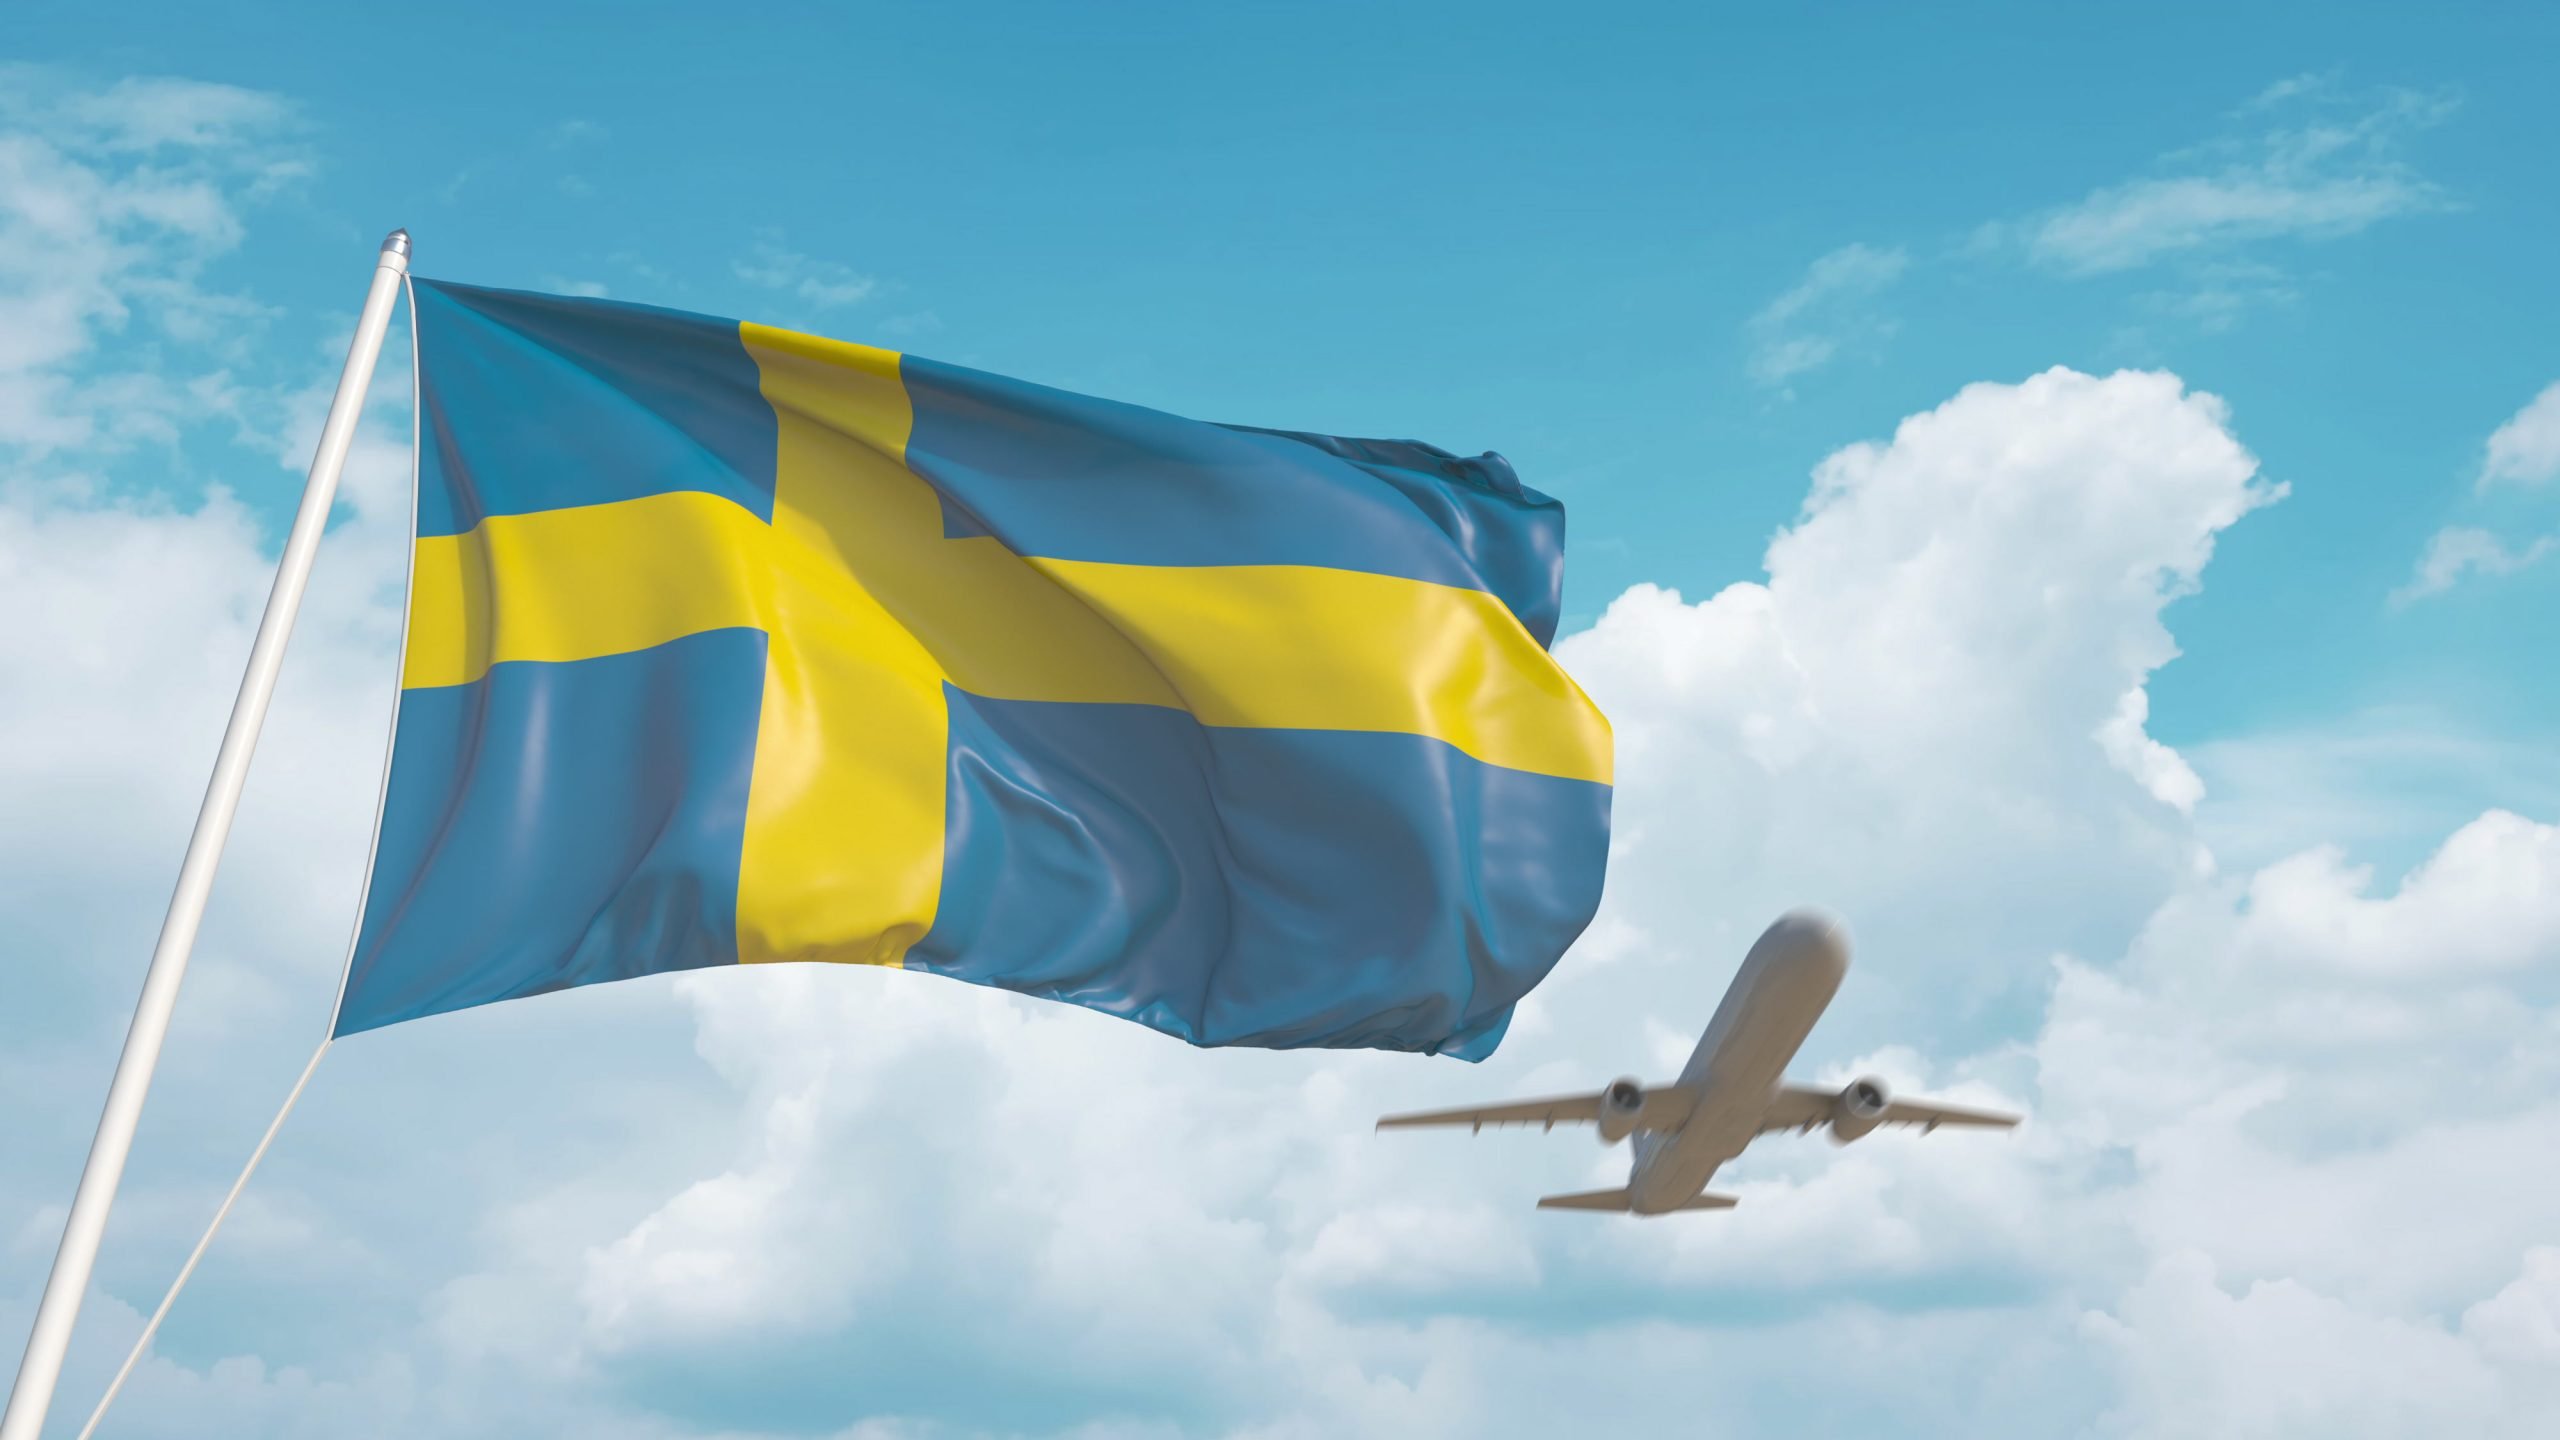 Negative travel advice for Sweden has major consequences